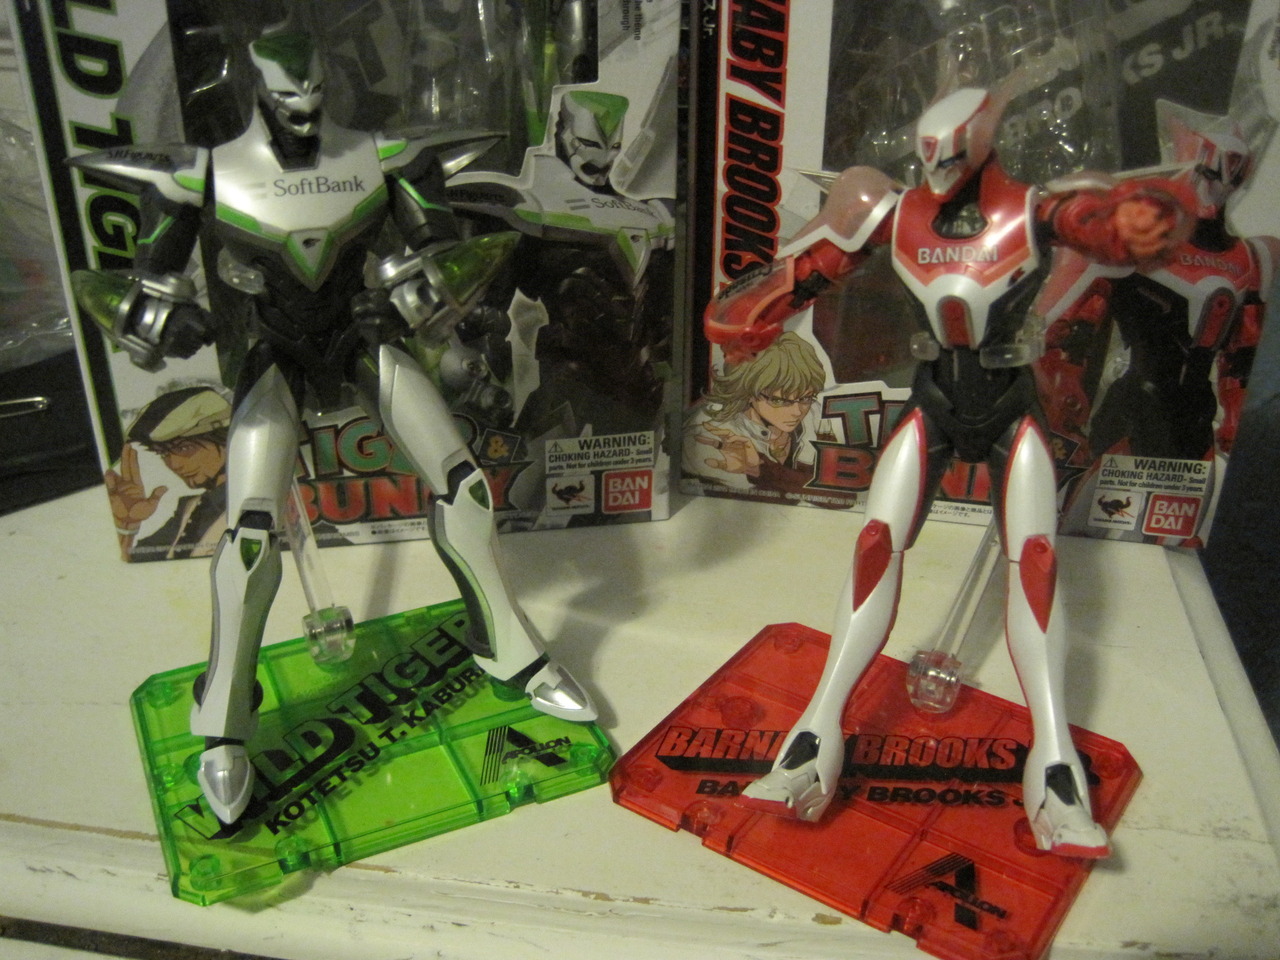 So on the topic of collectibles, I took some pictures of my Tiger &amp; Bunny